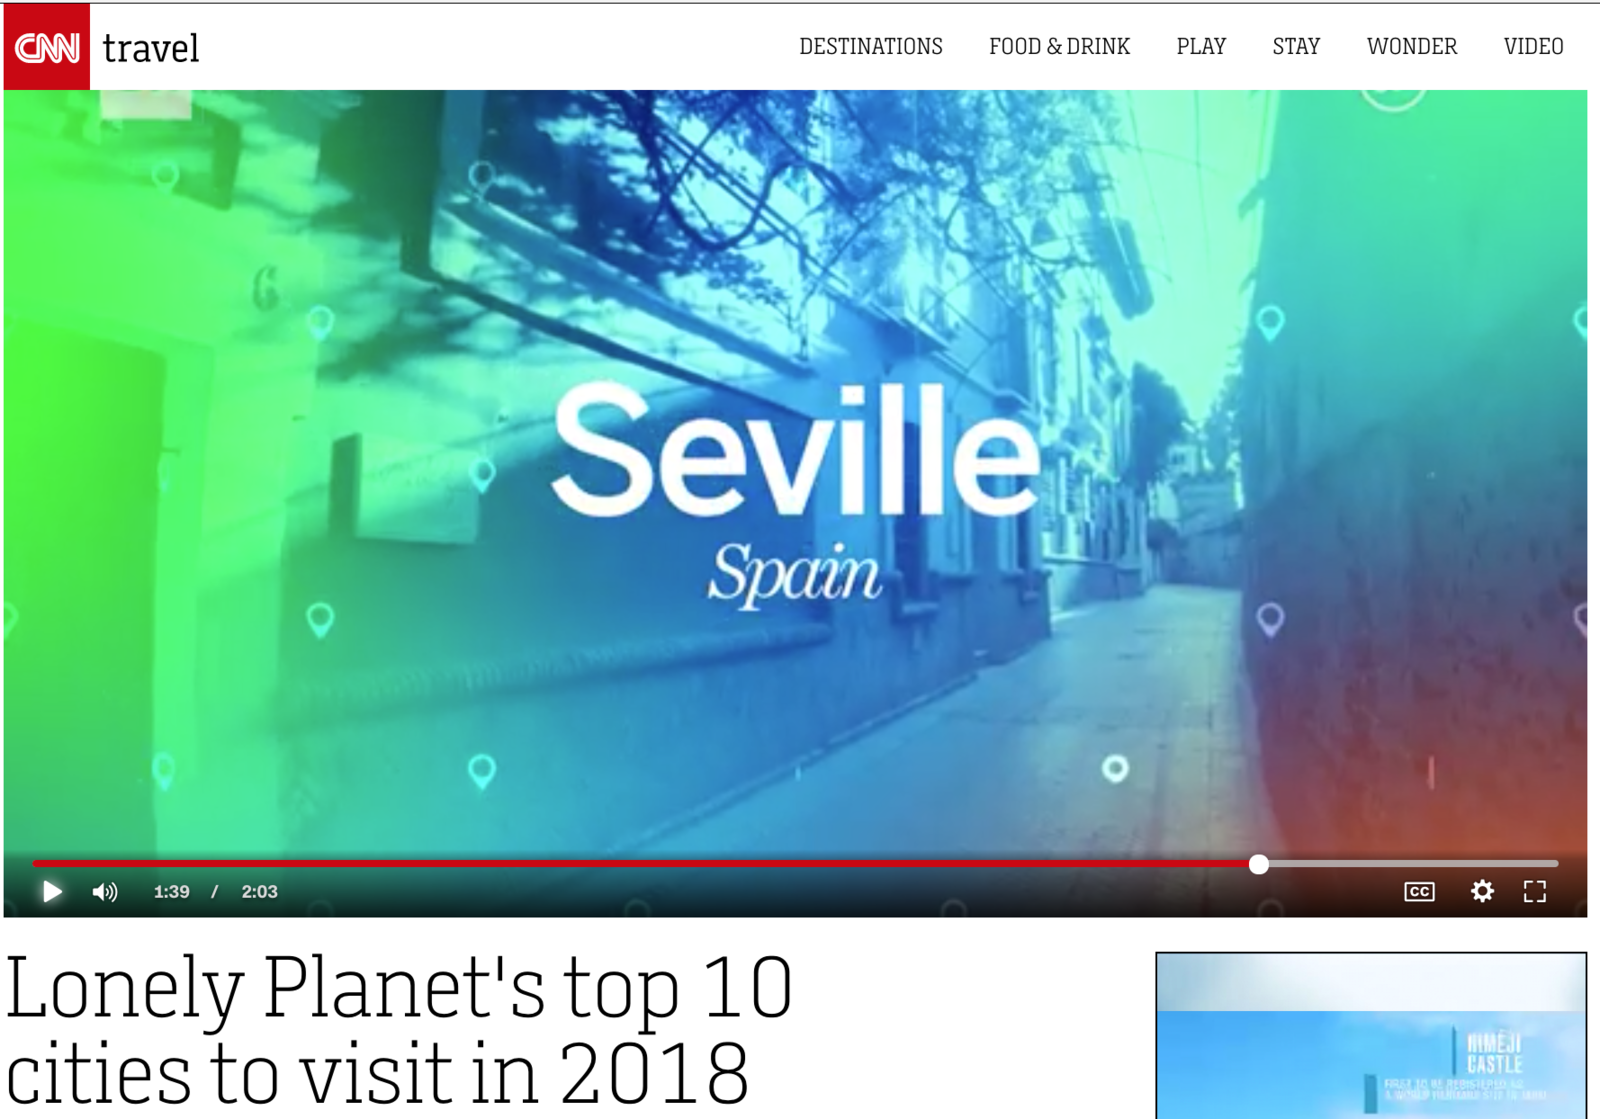 SEVILLE, SPAIN IS THE LONELY PLANET’S #1 DESTINATION RECOMMENDATION FOR 2018